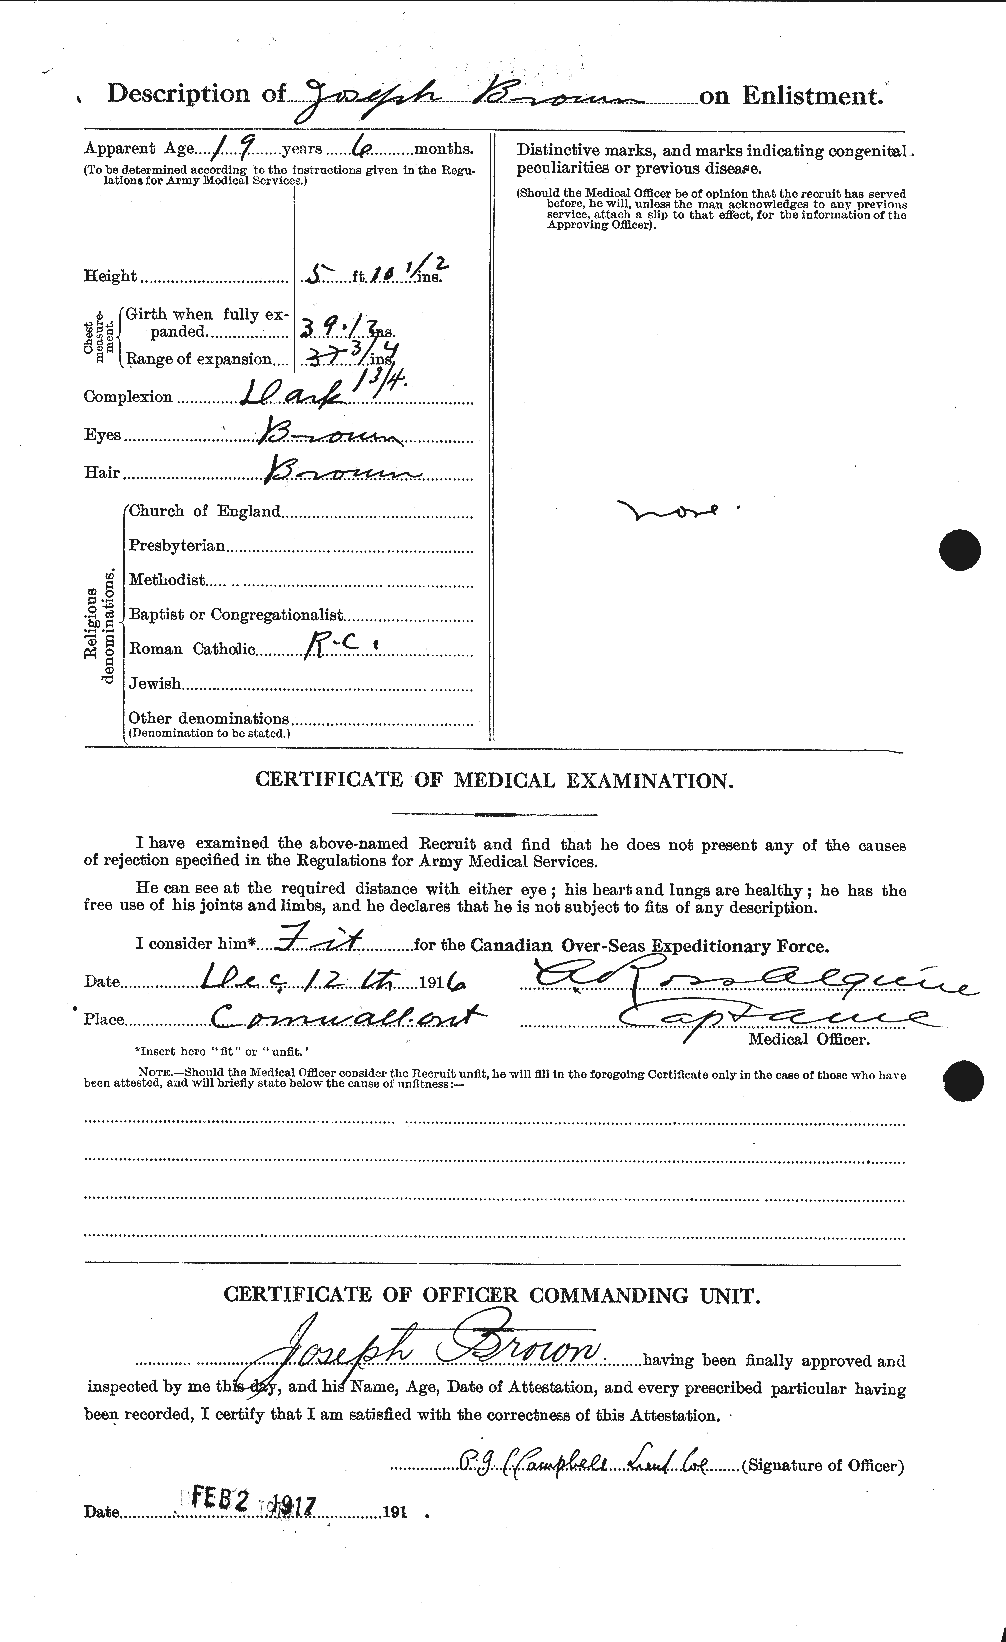 Personnel Records of the First World War - CEF 265942b